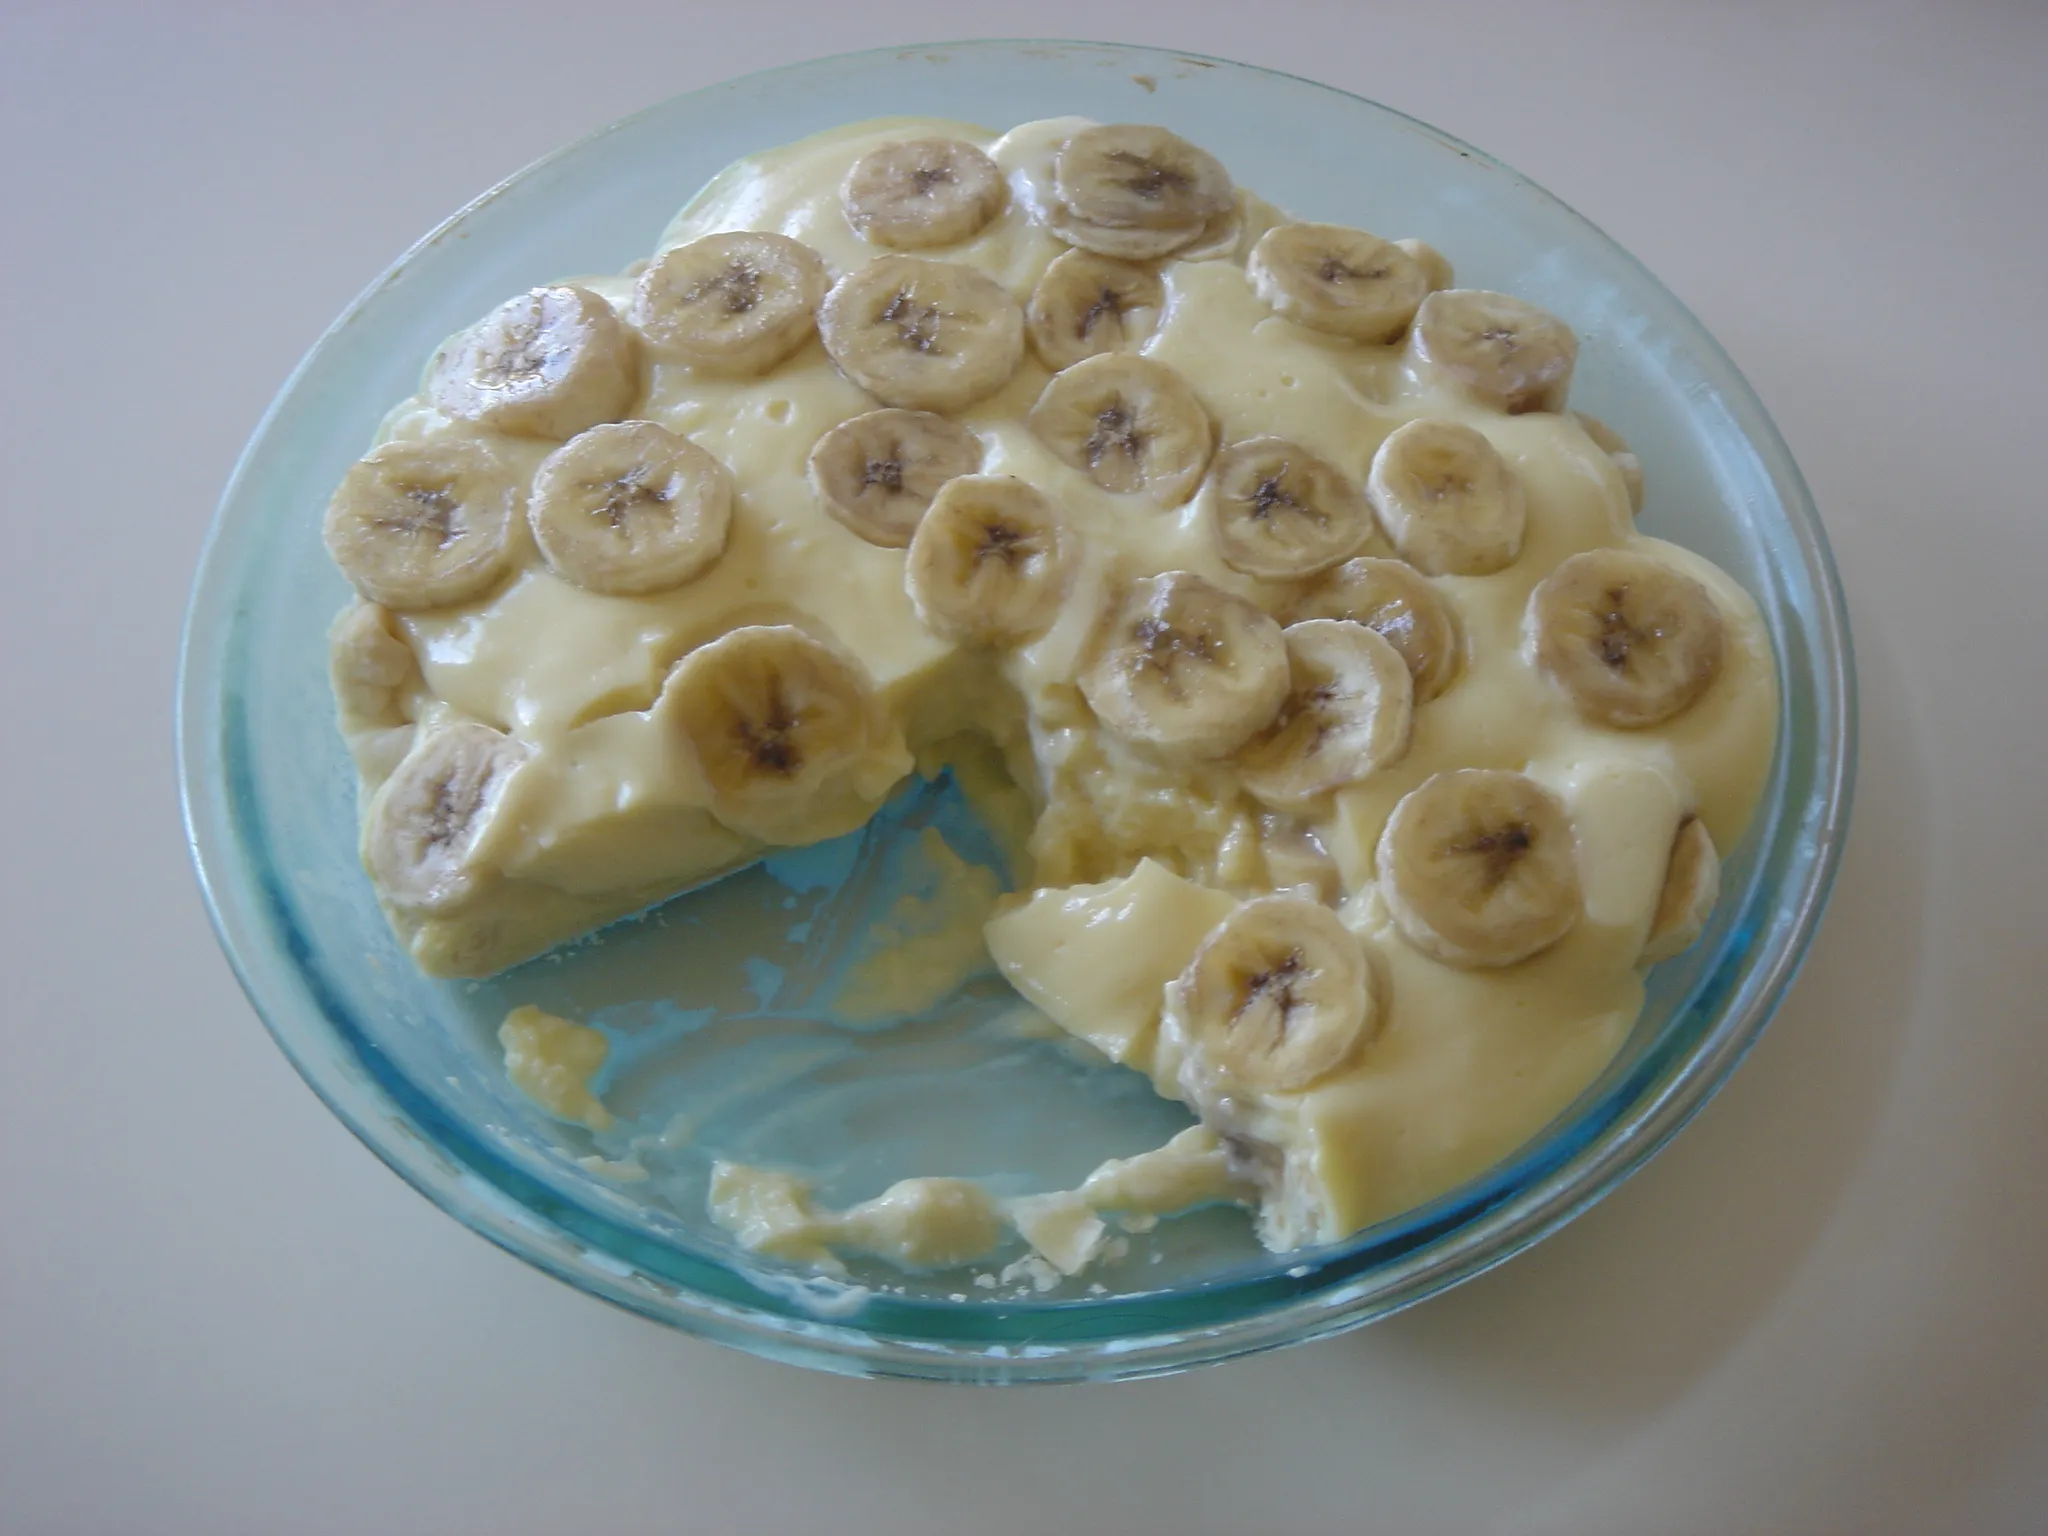 Delicious Banana Pudding Recipe with Lorna Doone Cookies